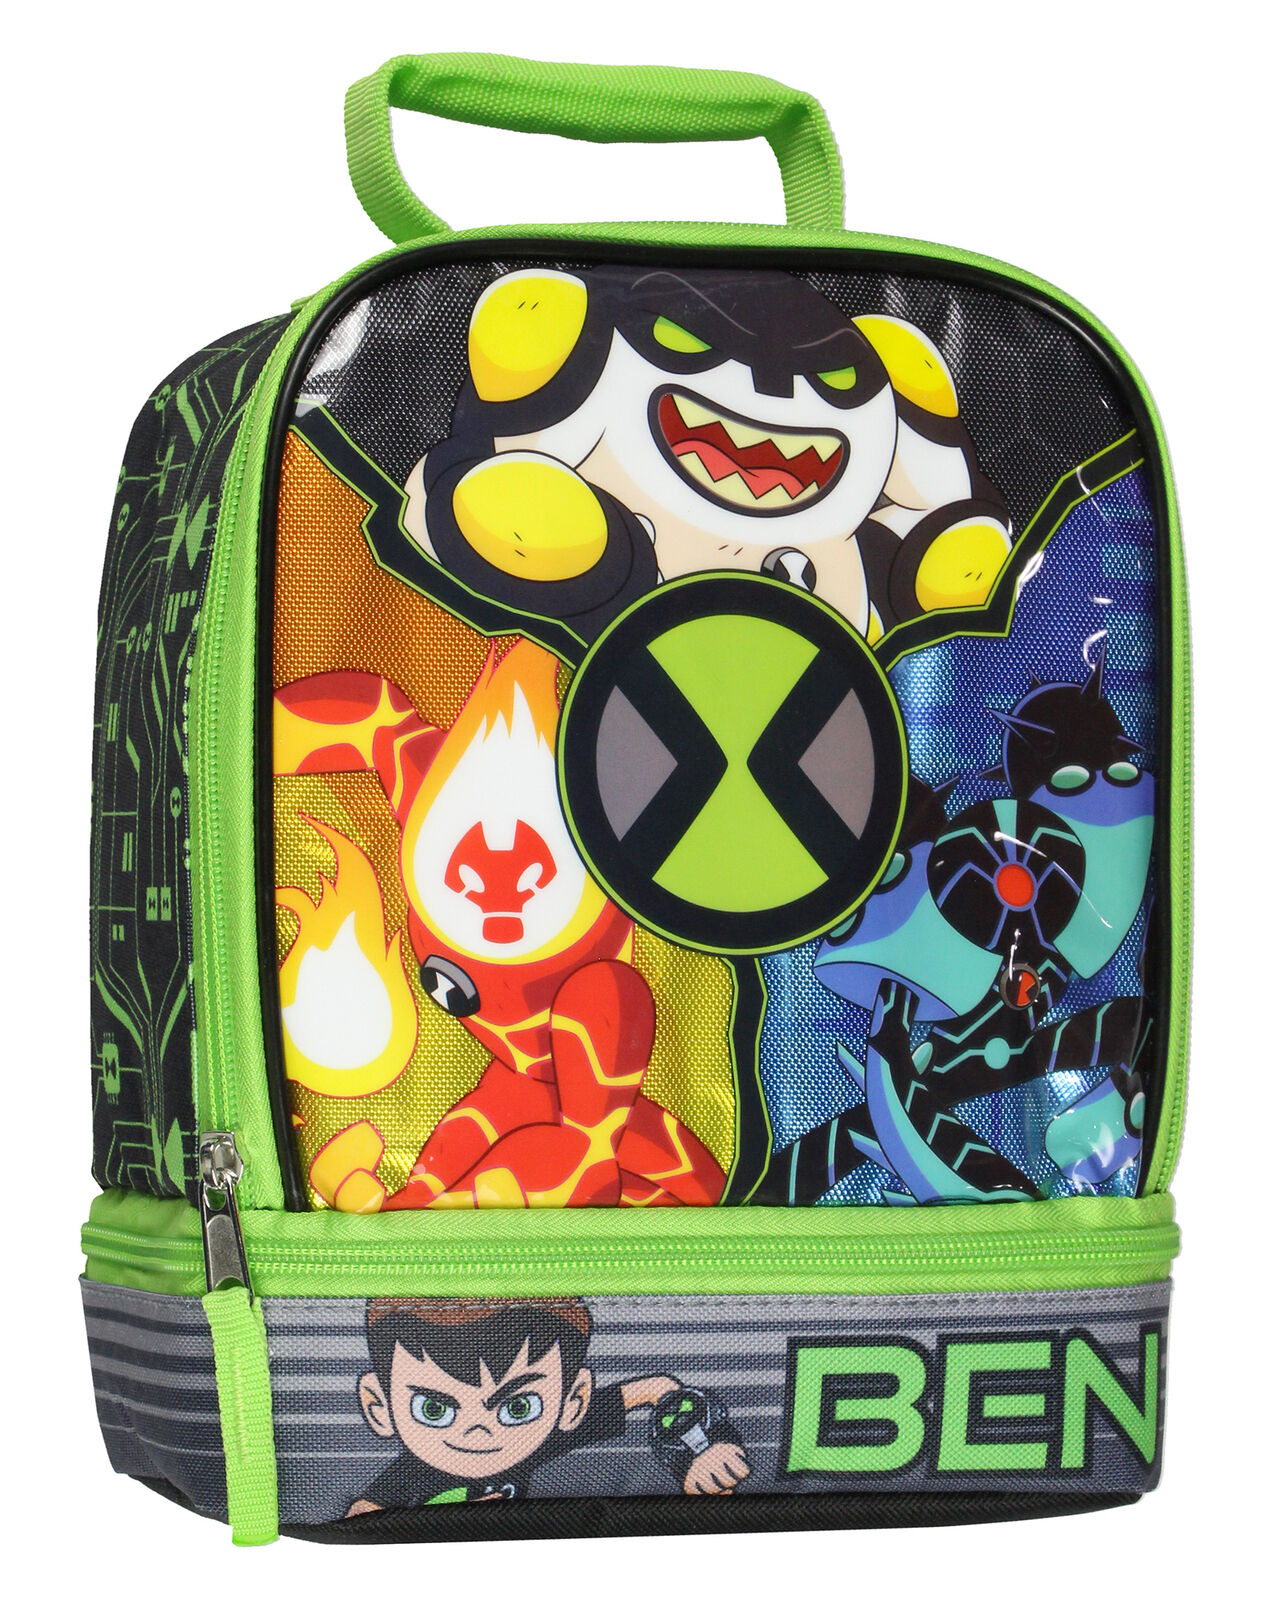 Ben 10 Omnitrix Alien Force Insulated Dual Compartment Lunch Bag Tote